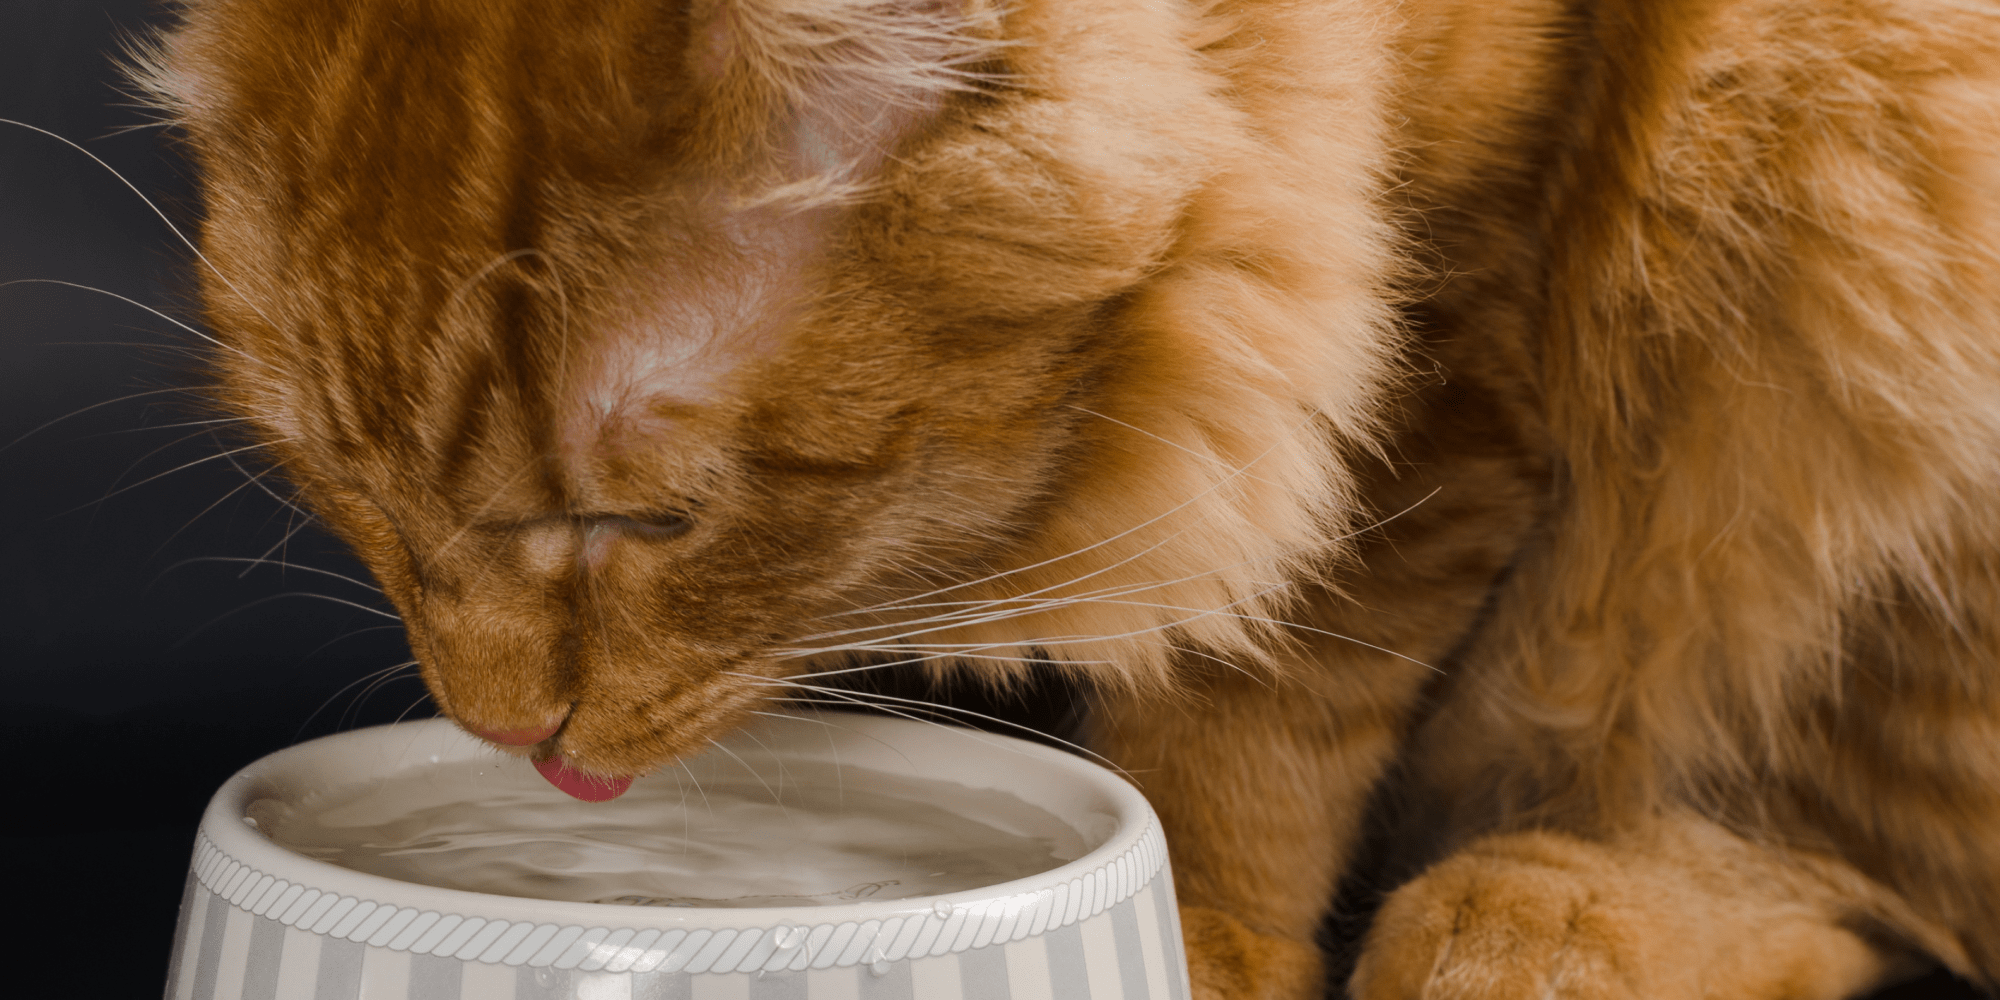 A photo of a ginger cat drinking from a water bowl